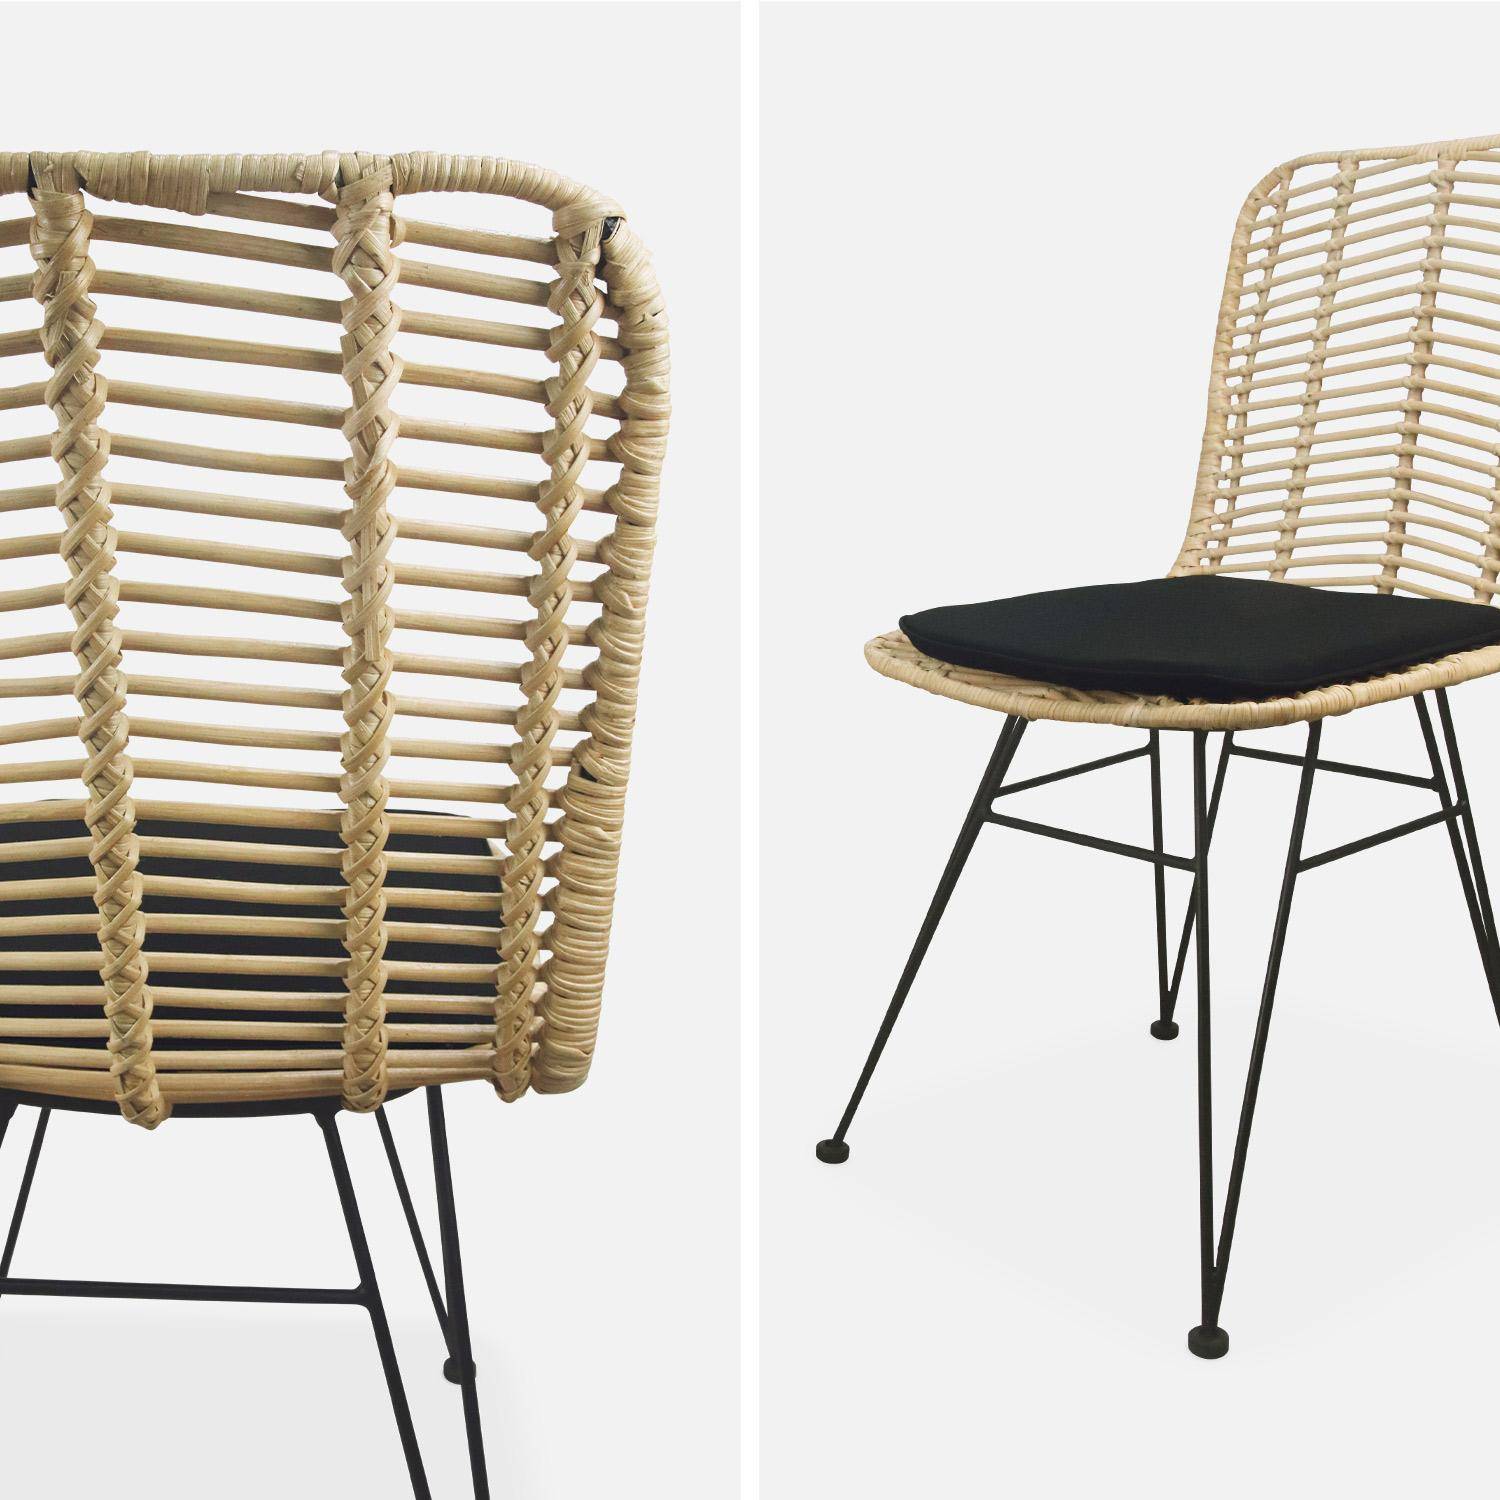 Pair of high-backed rattan dining chairs with metal legs and cushions - Cahya - Natural rattan, Black cushions Photo6